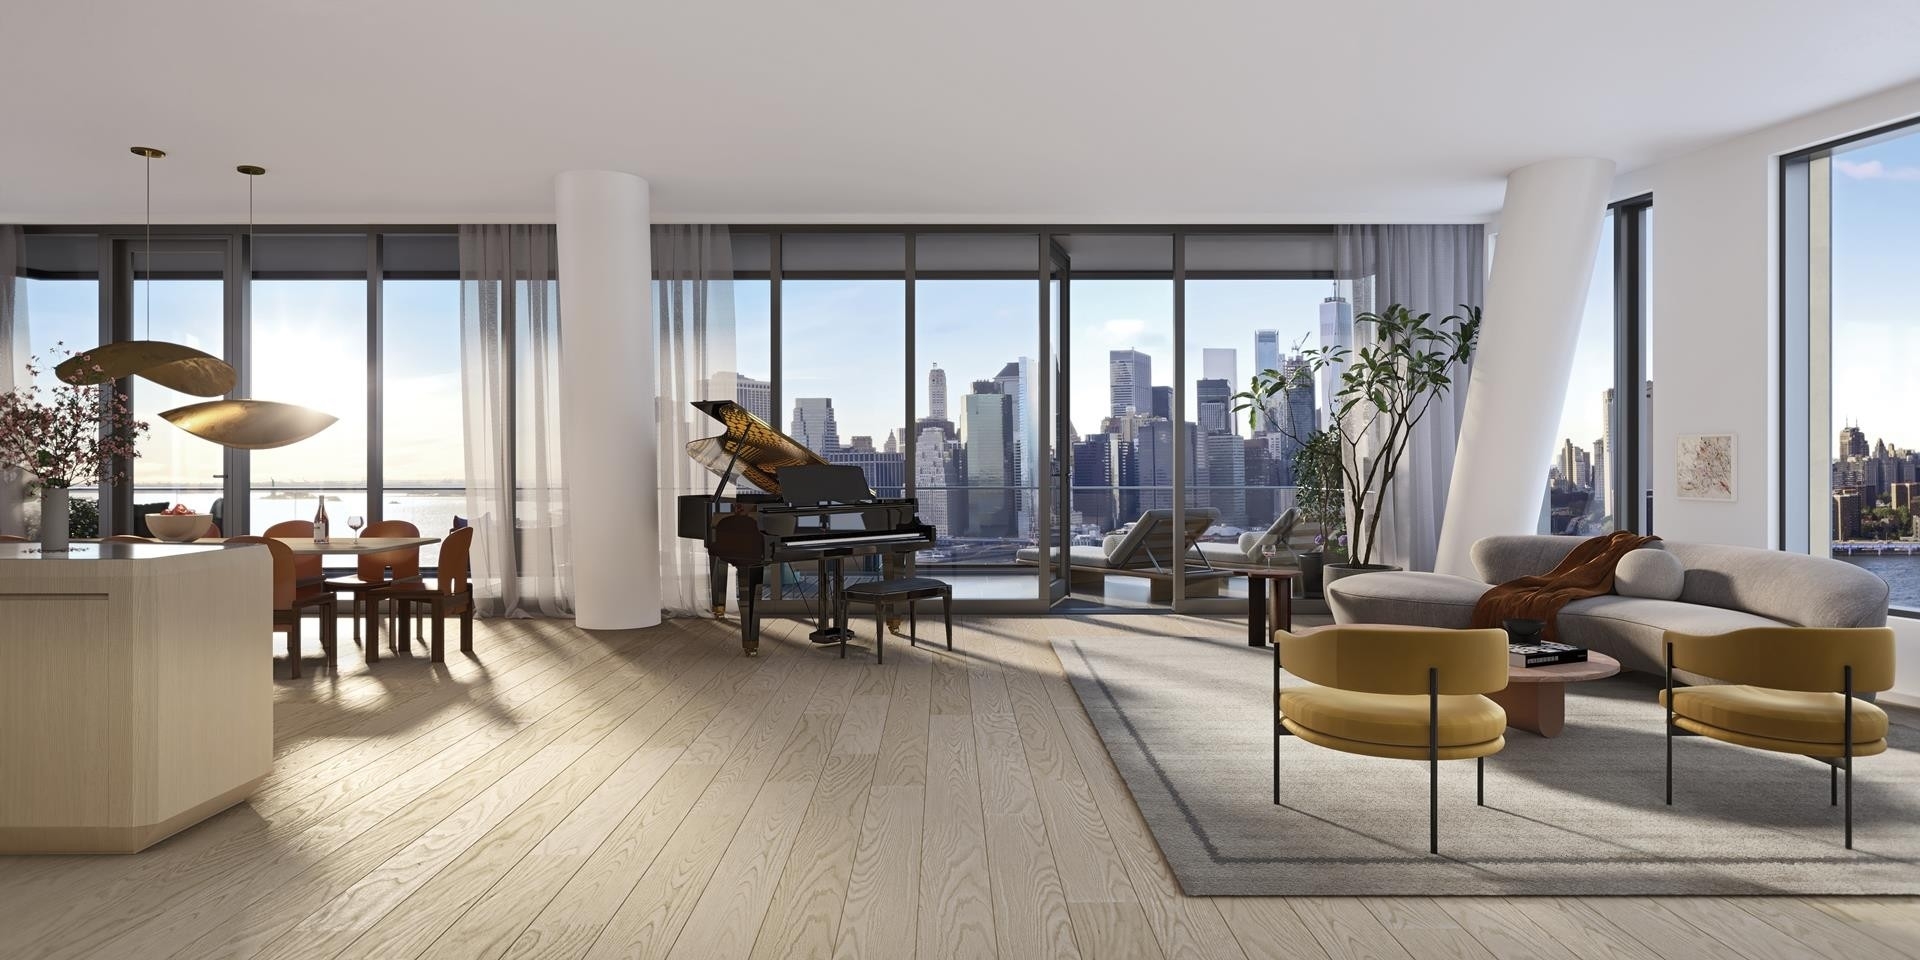 Condominium for Sale at Olympia Dumbo, 30 FRONT ST, 25B Brooklyn, New York 11201